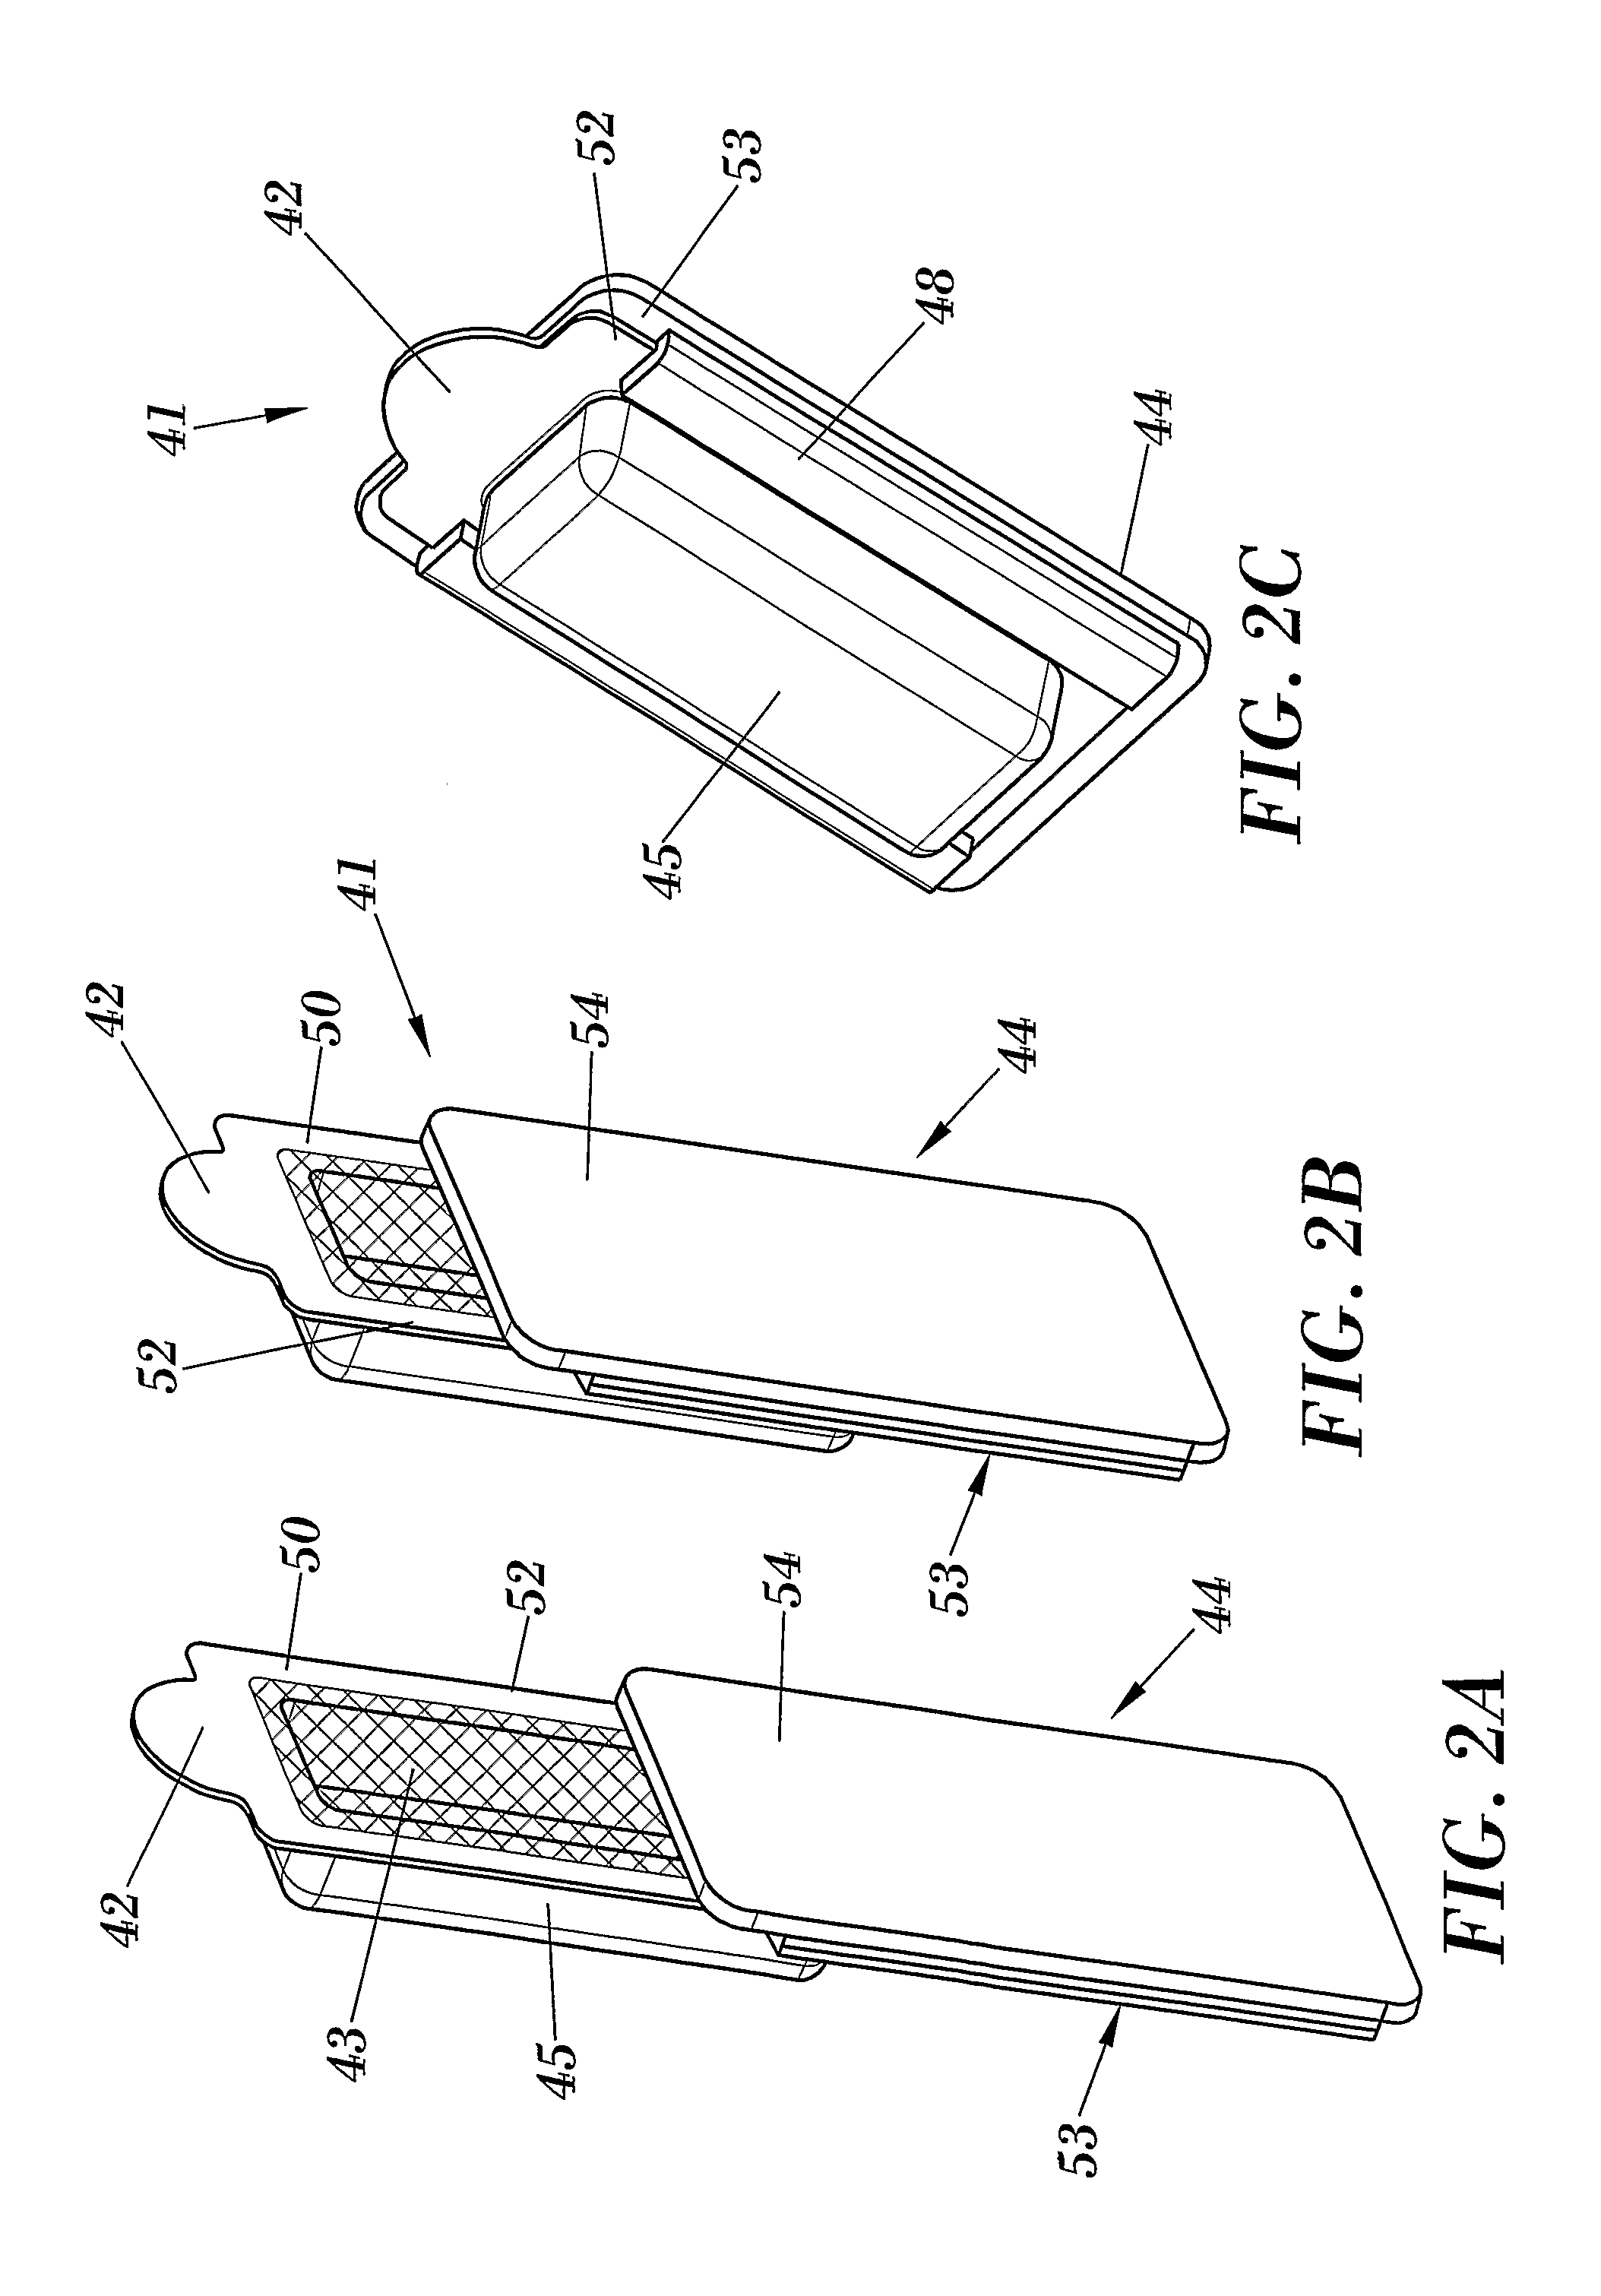 Adjustable volatile substance diffuser device with a container with a membrane